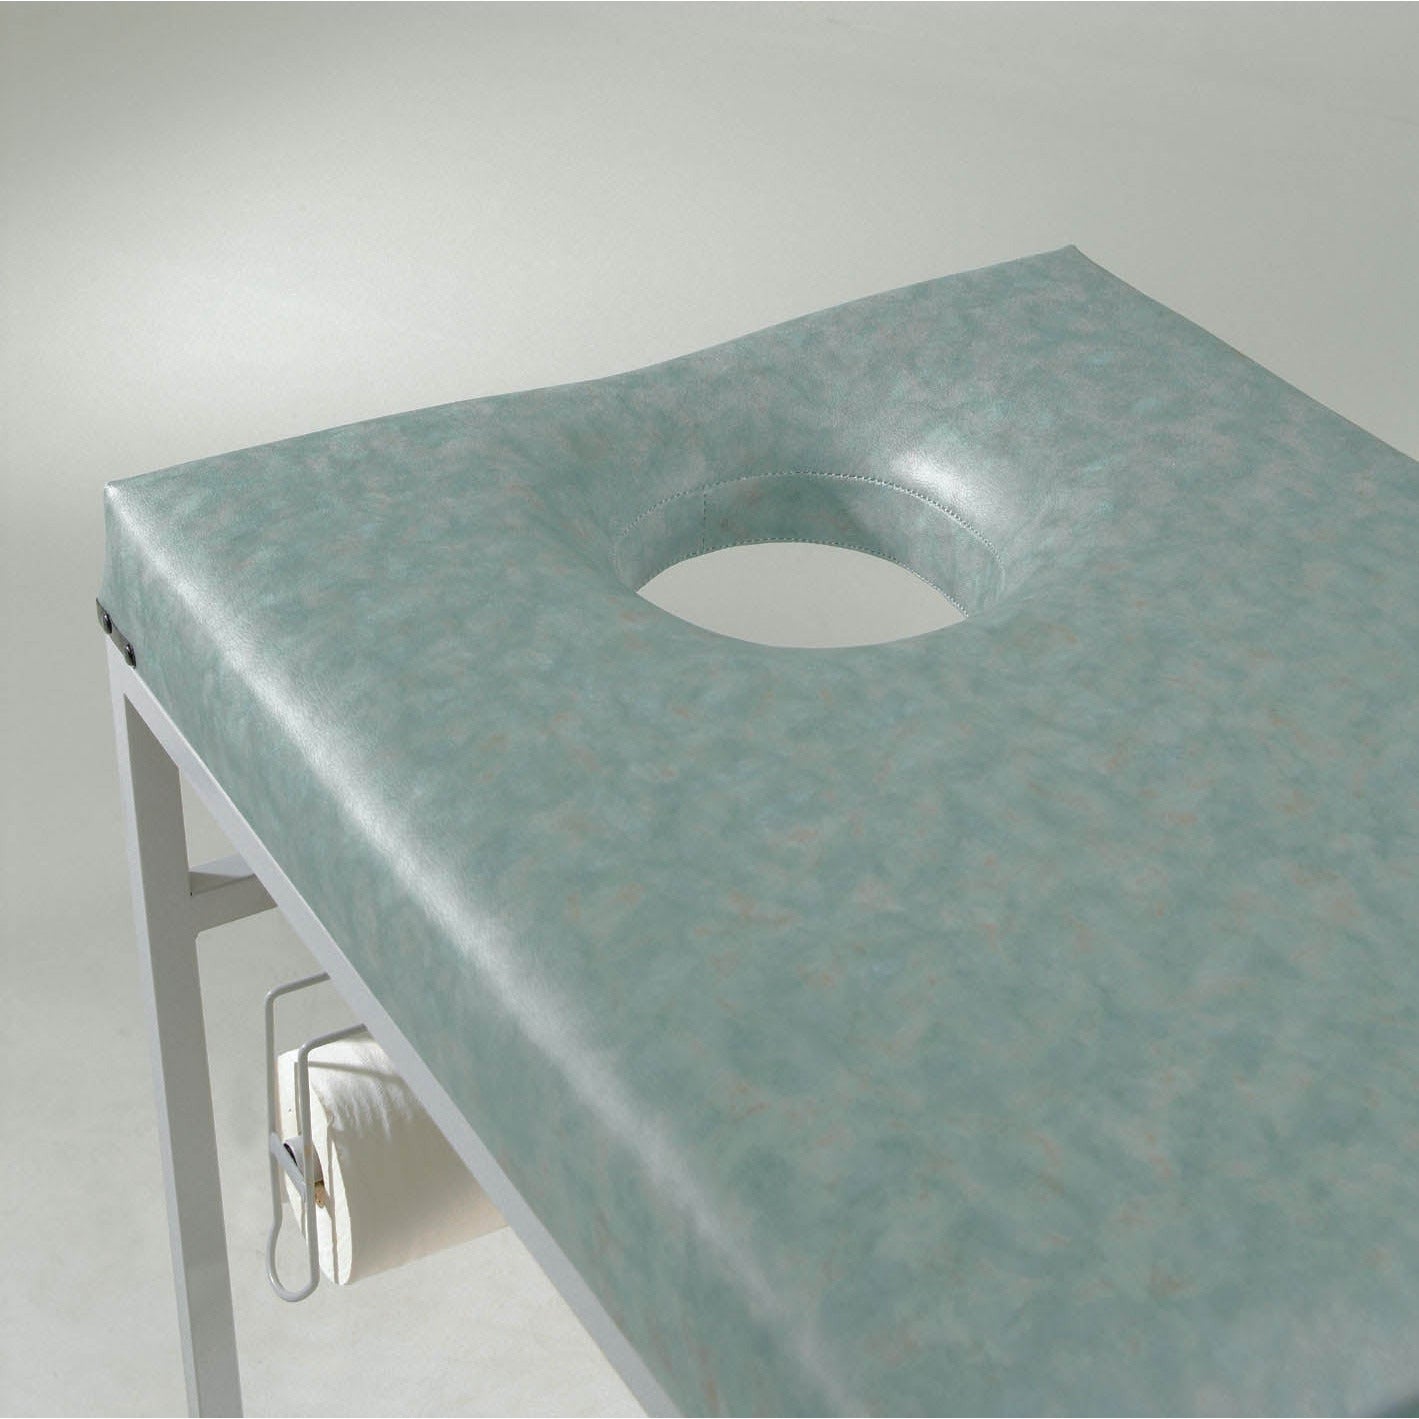 Amerson Massage/Treatment Couch with Breathe Hole, Plug and Towel Holder - No Drawers